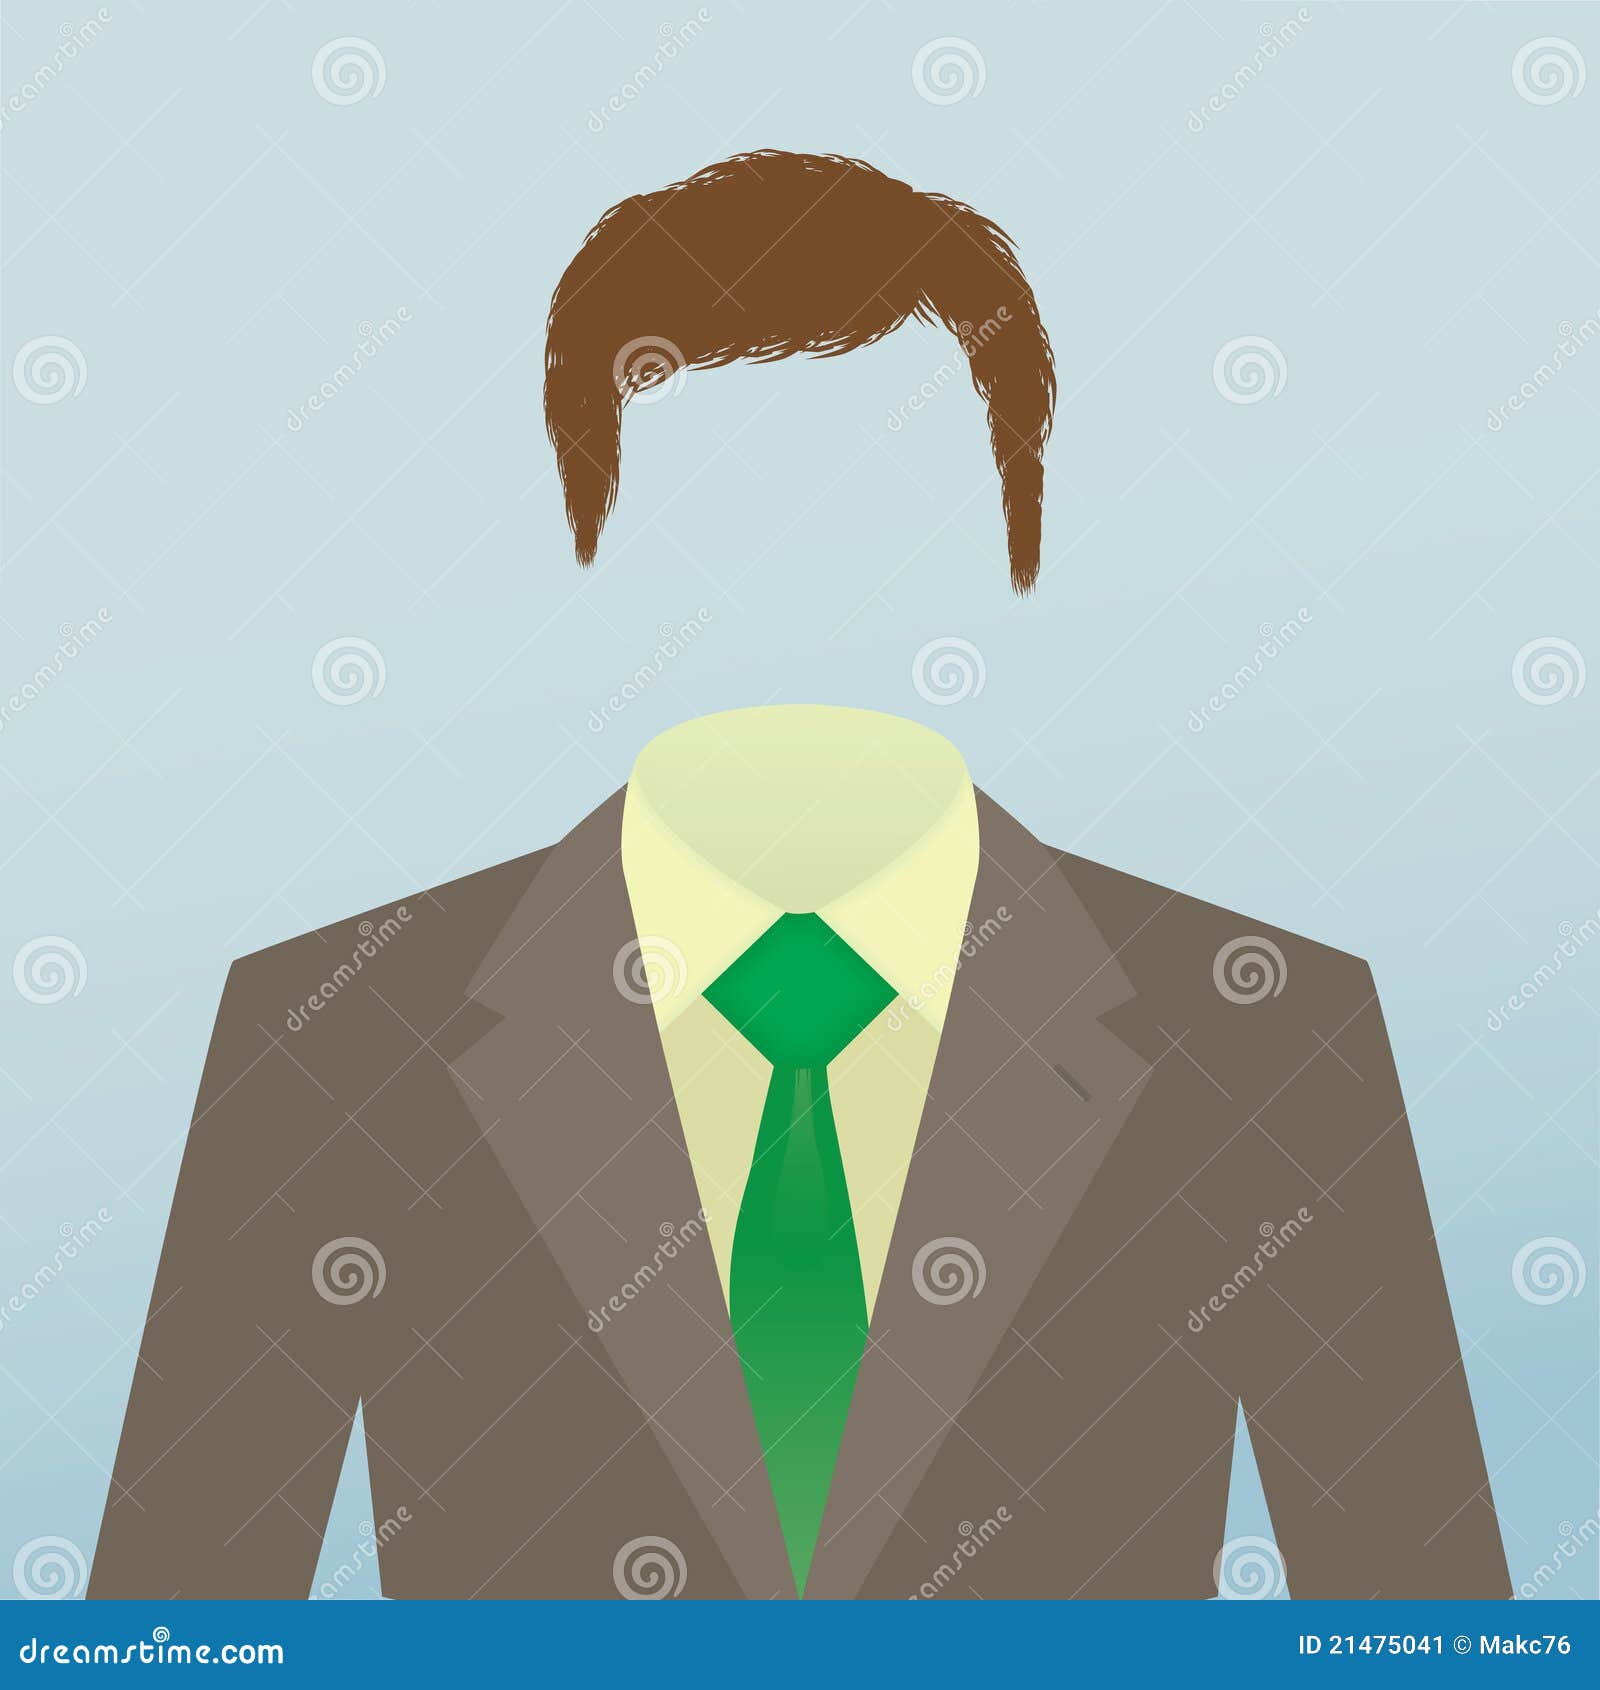 clipart suit and tie - photo #37